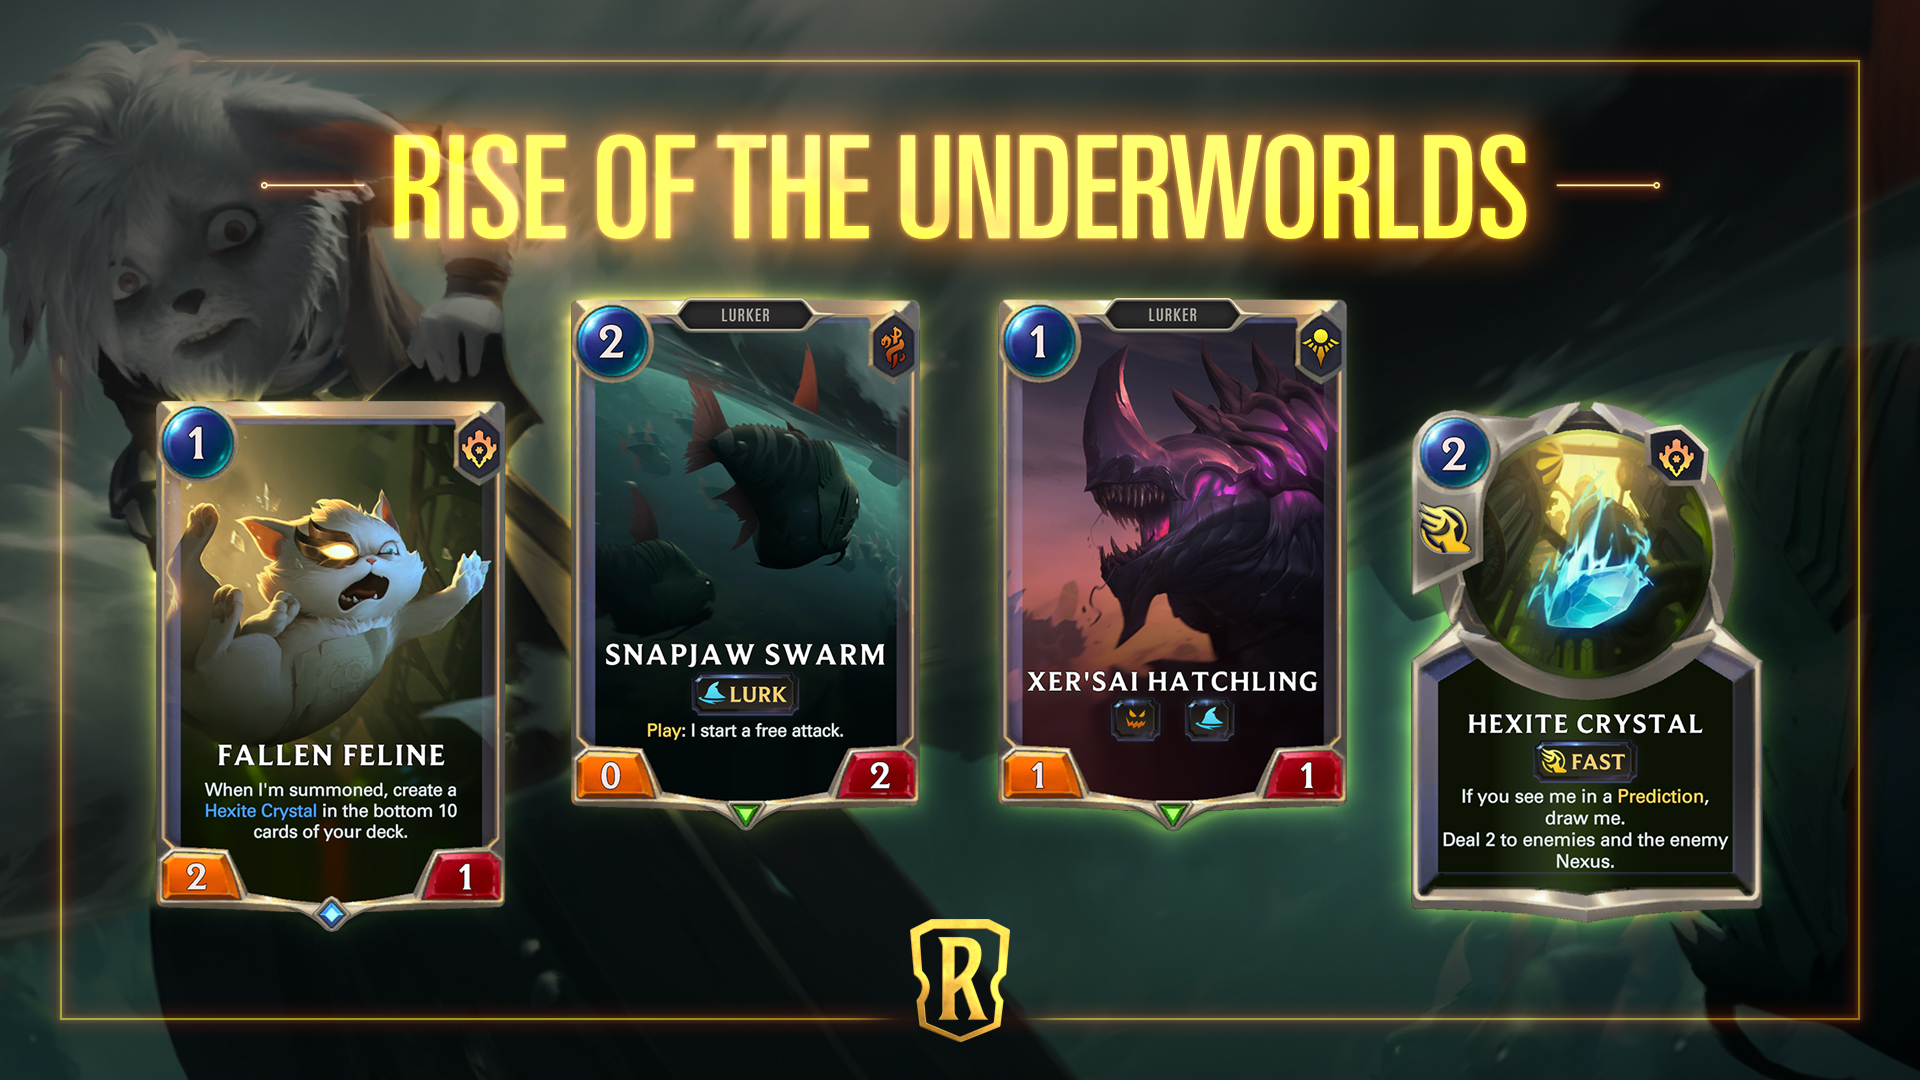 løfte kran købmand Legends of Runeterra on Twitter: "As three new champions emerge from below,  they're bringing a taste of Bilgewater, Shurima, and Piltover &amp; Zaun to  Rise of the Underworlds. https://t.co/TxW1xMuhIk" / X